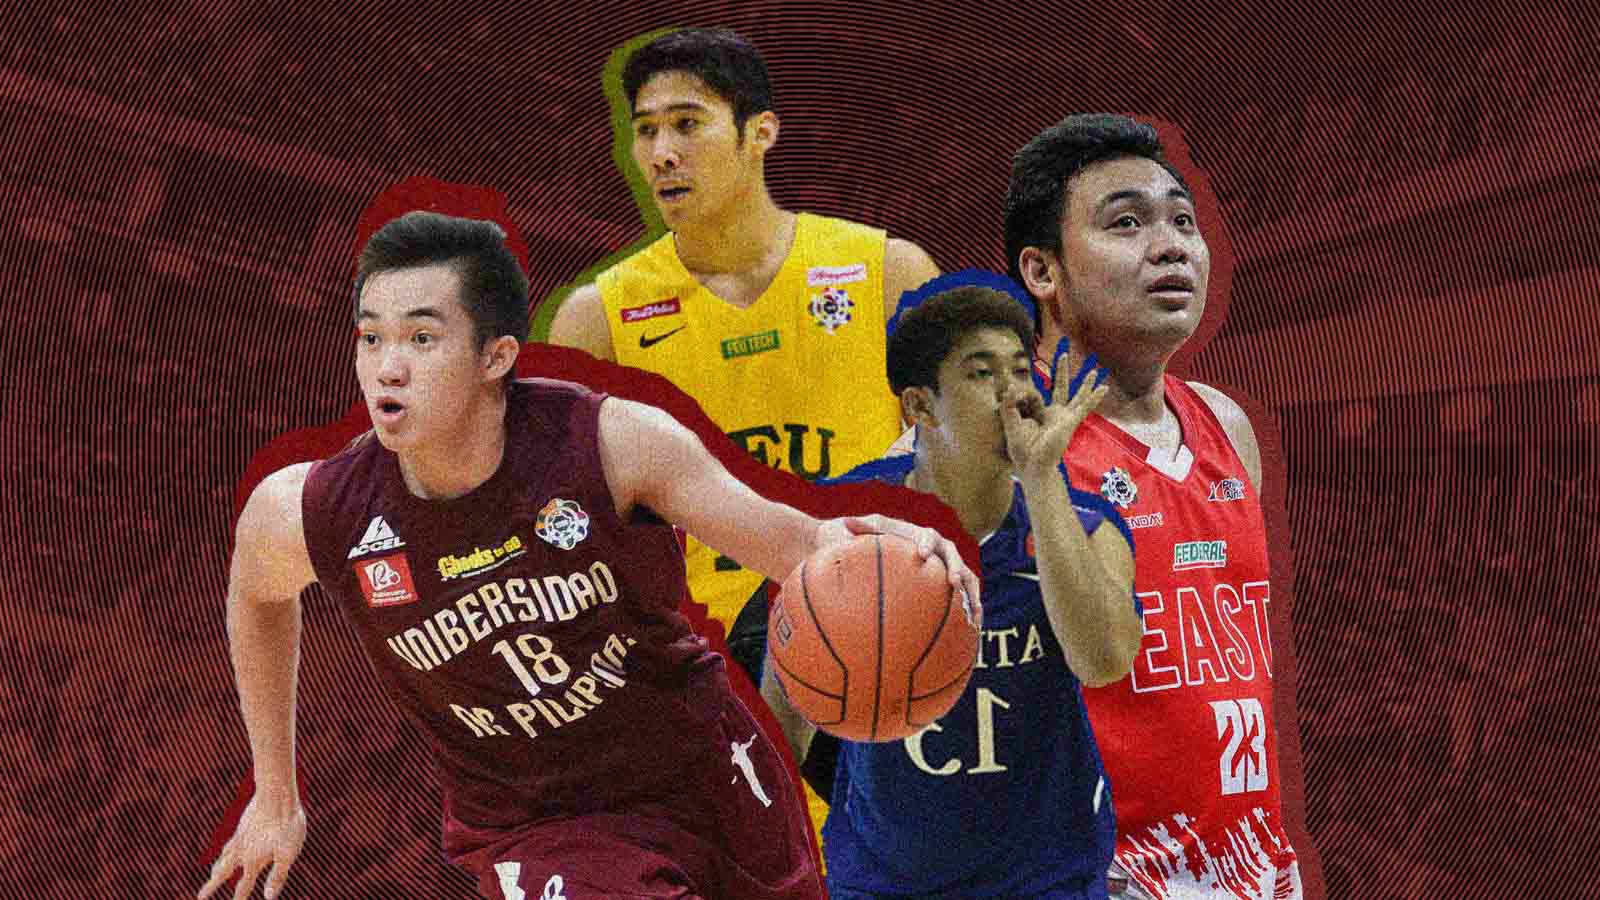 Missing UAAP Basketball? Here are some memorable moments you can enjoy online